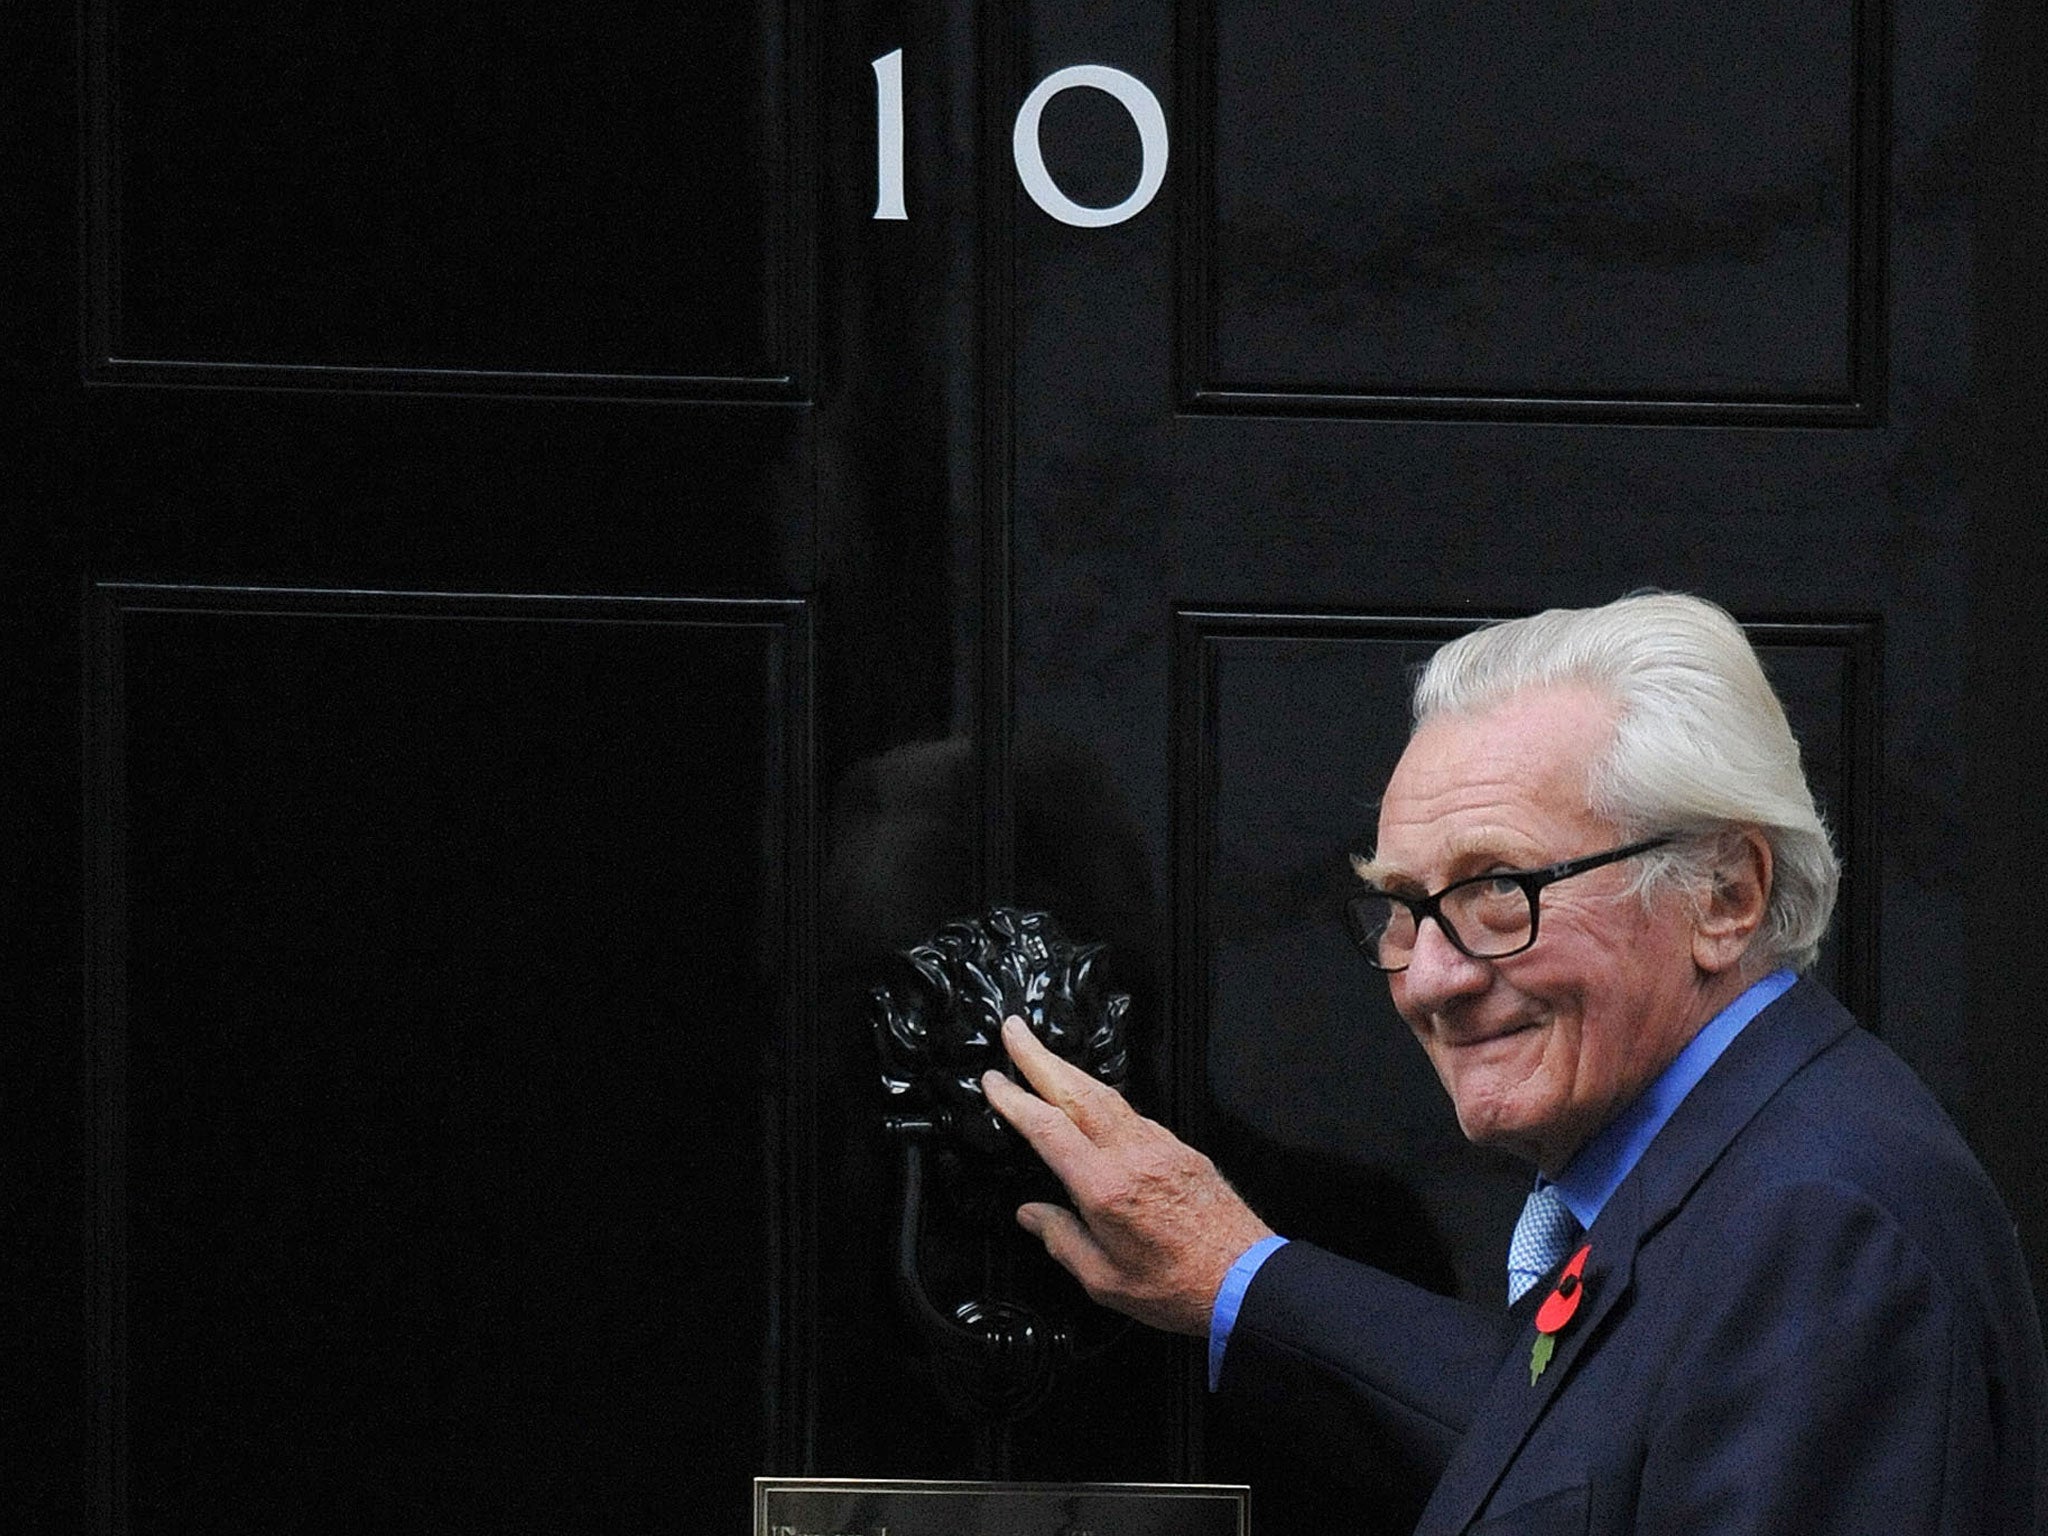 If growth is today’s biggest challenge, Heseltine has a plan to supercharge the economy